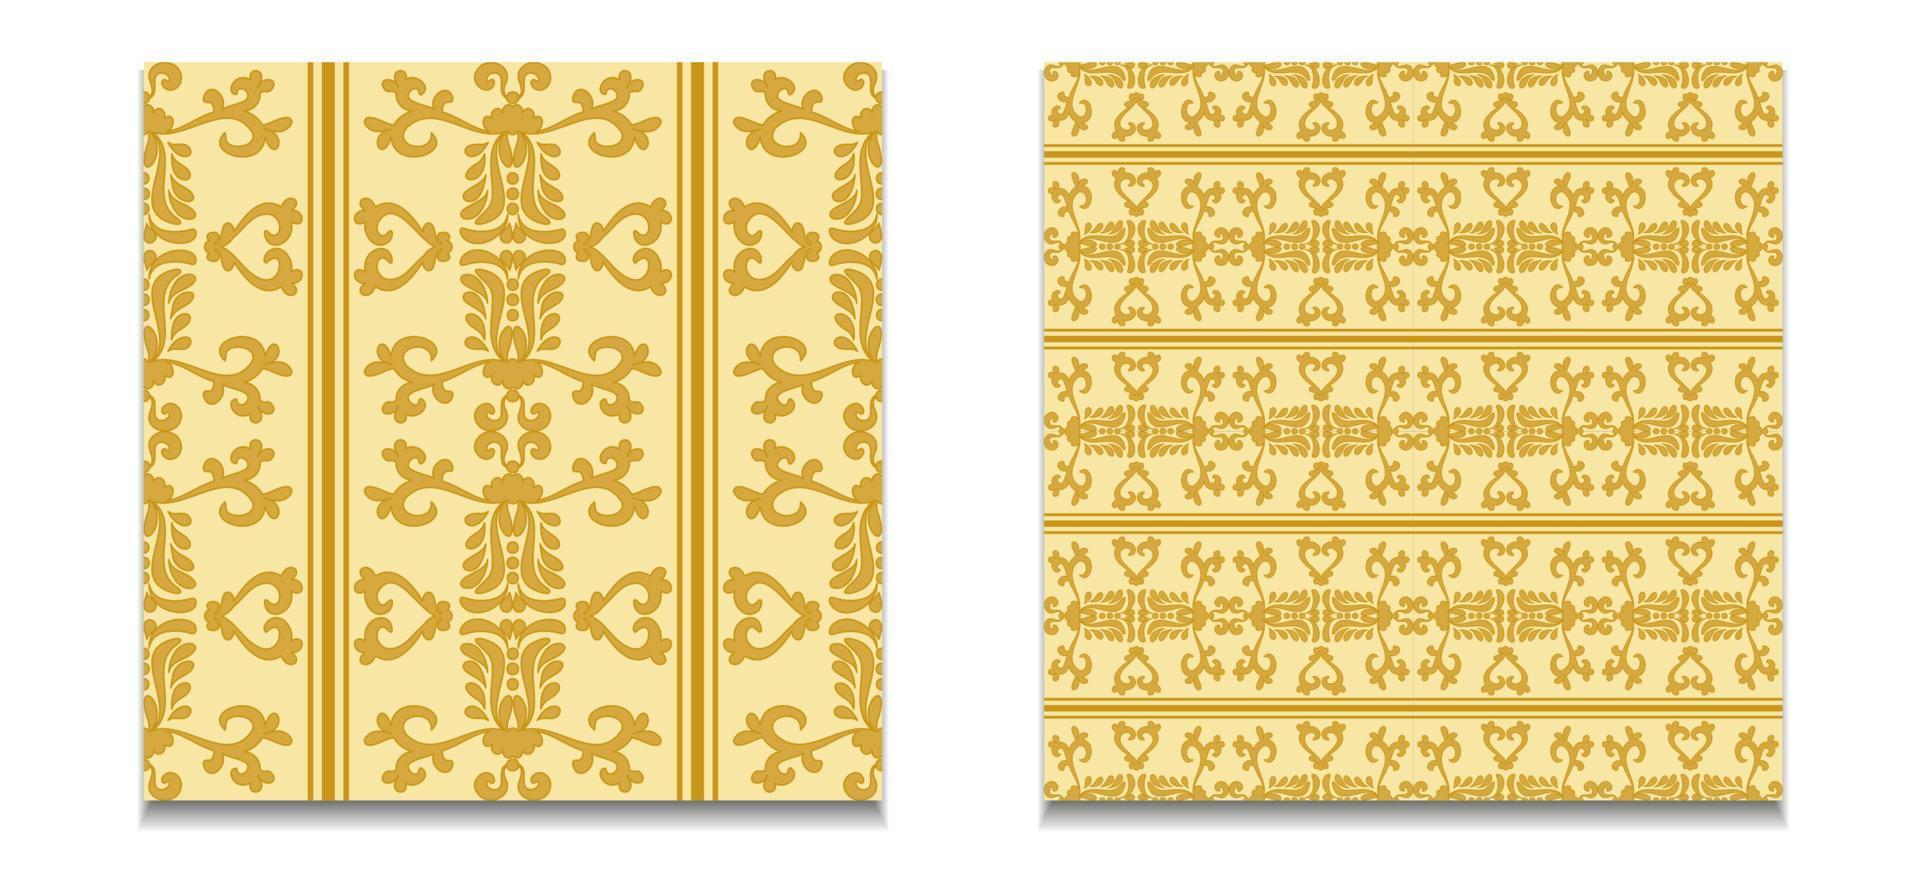 Two seamless vector patterns of gold damask patterns. Vintage seamless ornament. Gold, yellow. Vector graphics. For fabric, tile, wallpaper or packaging.